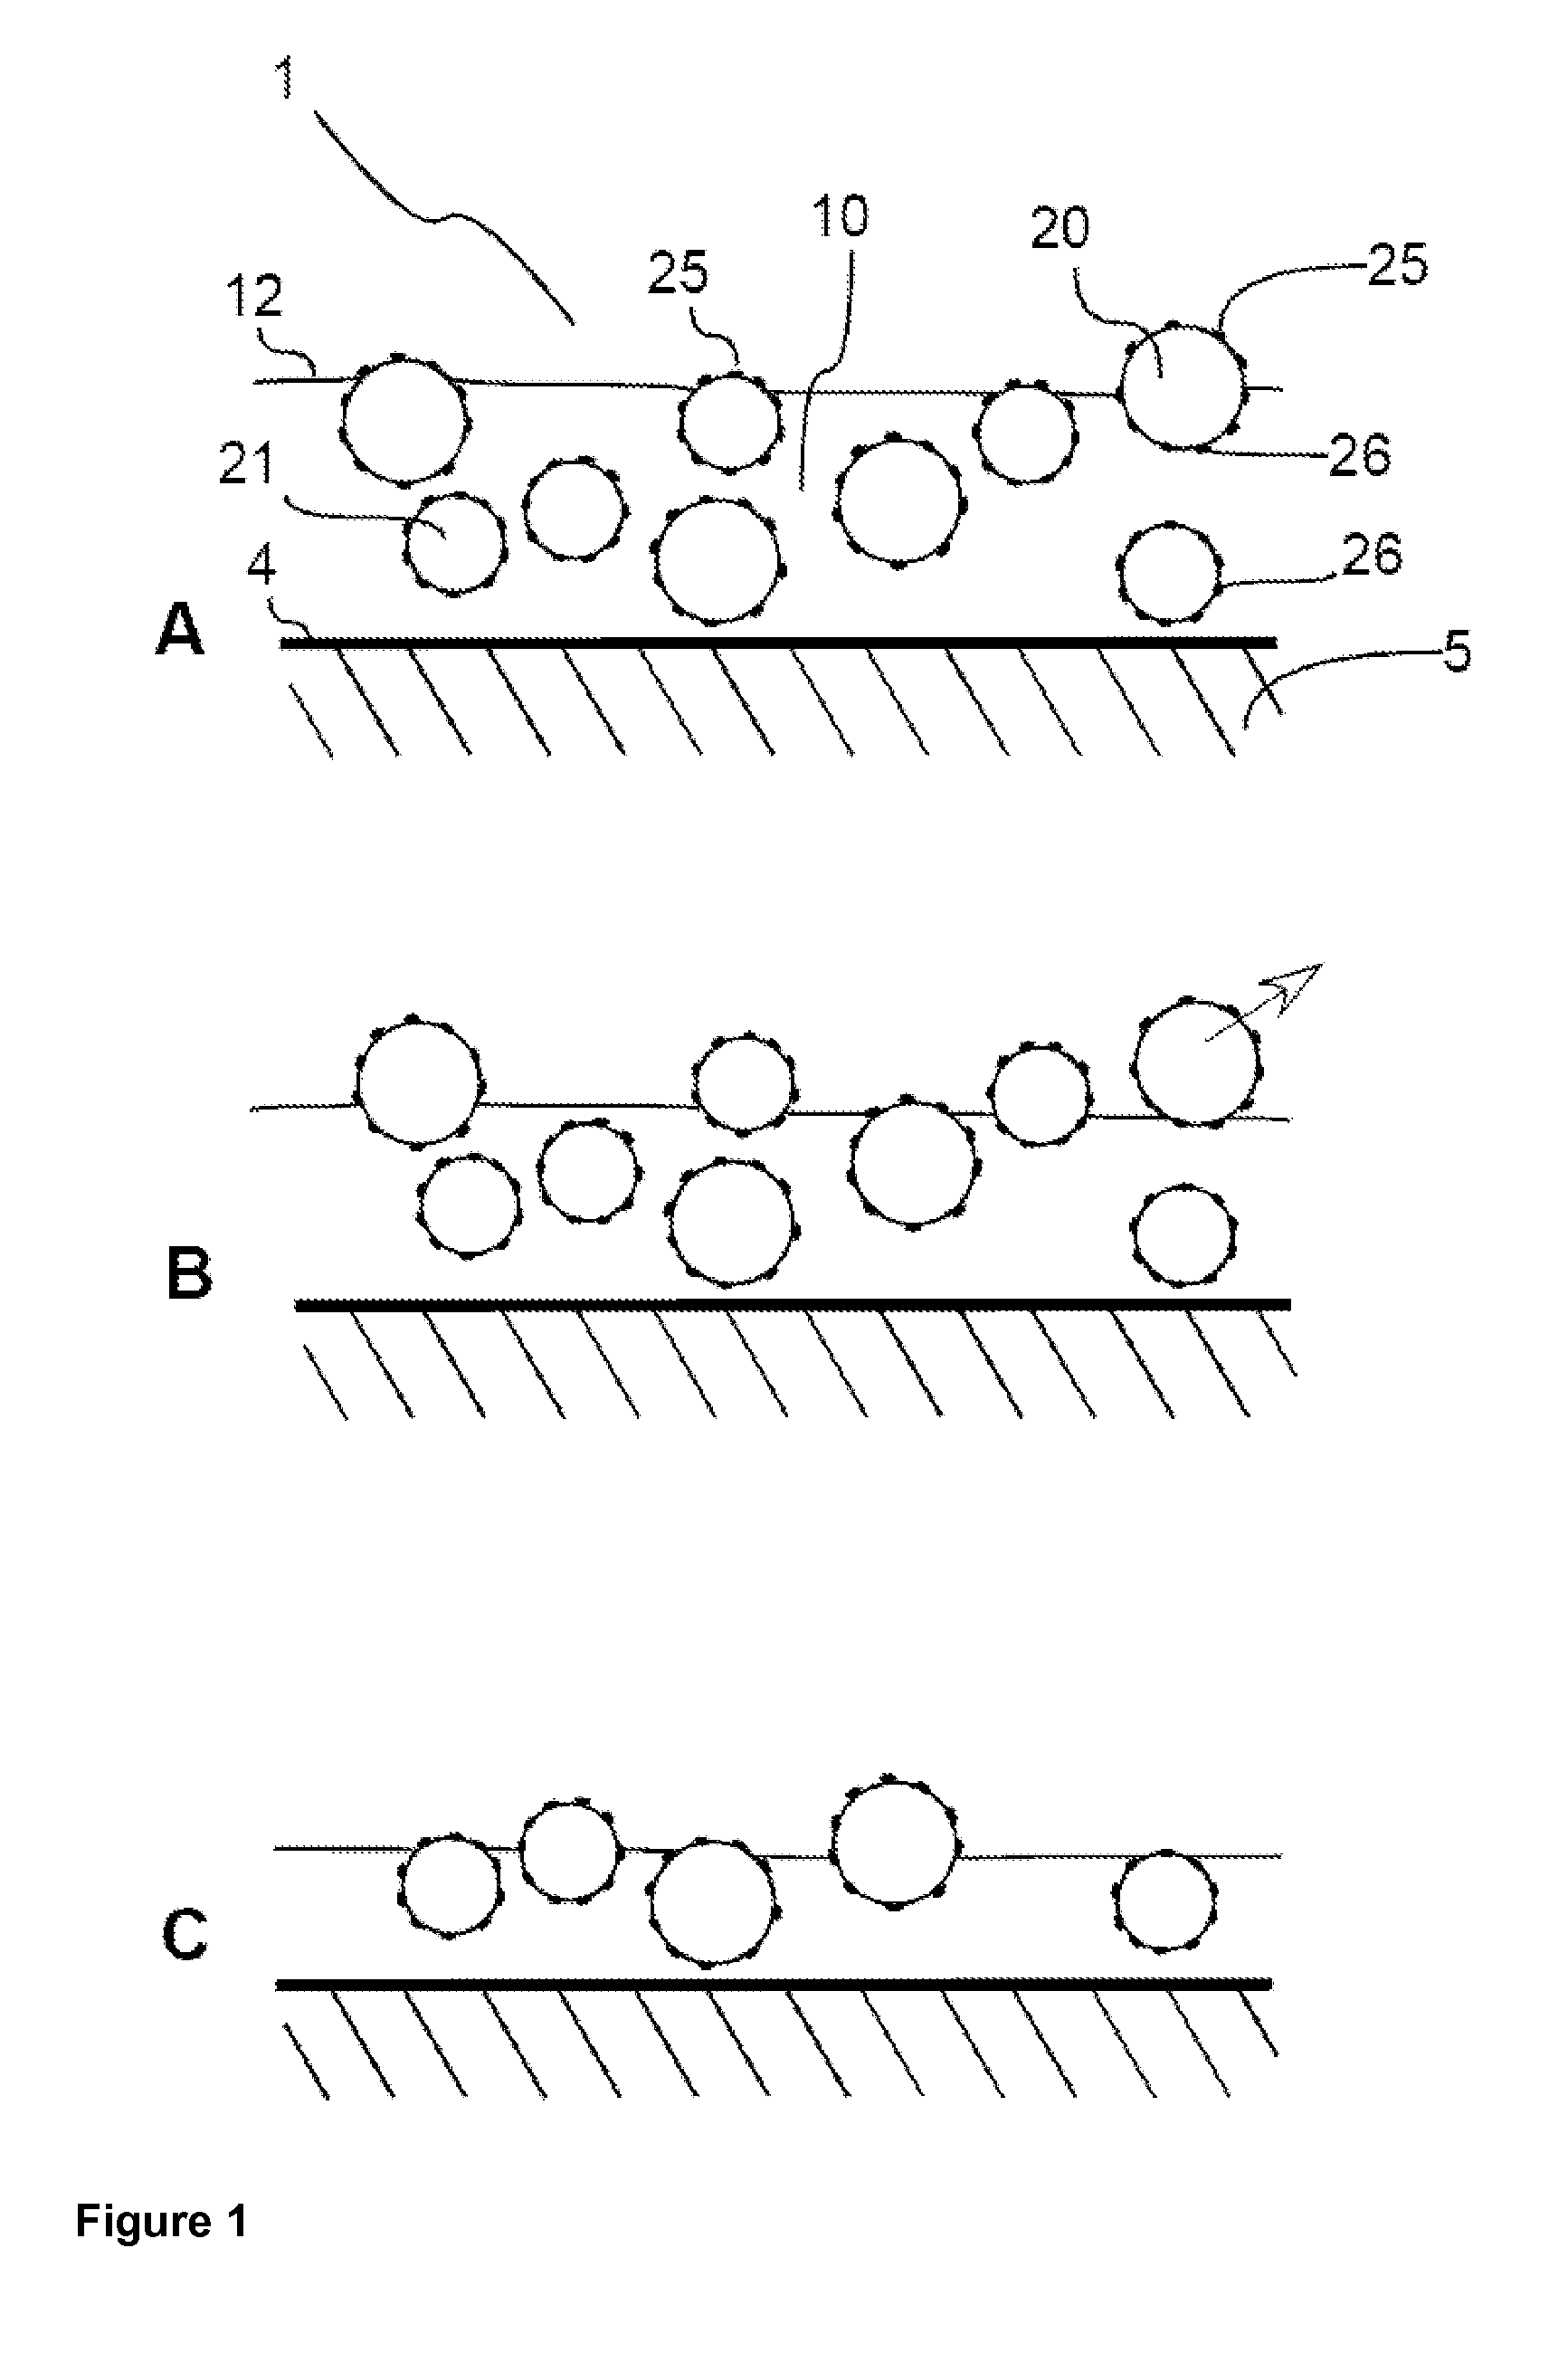 Self-cleaning coating composition